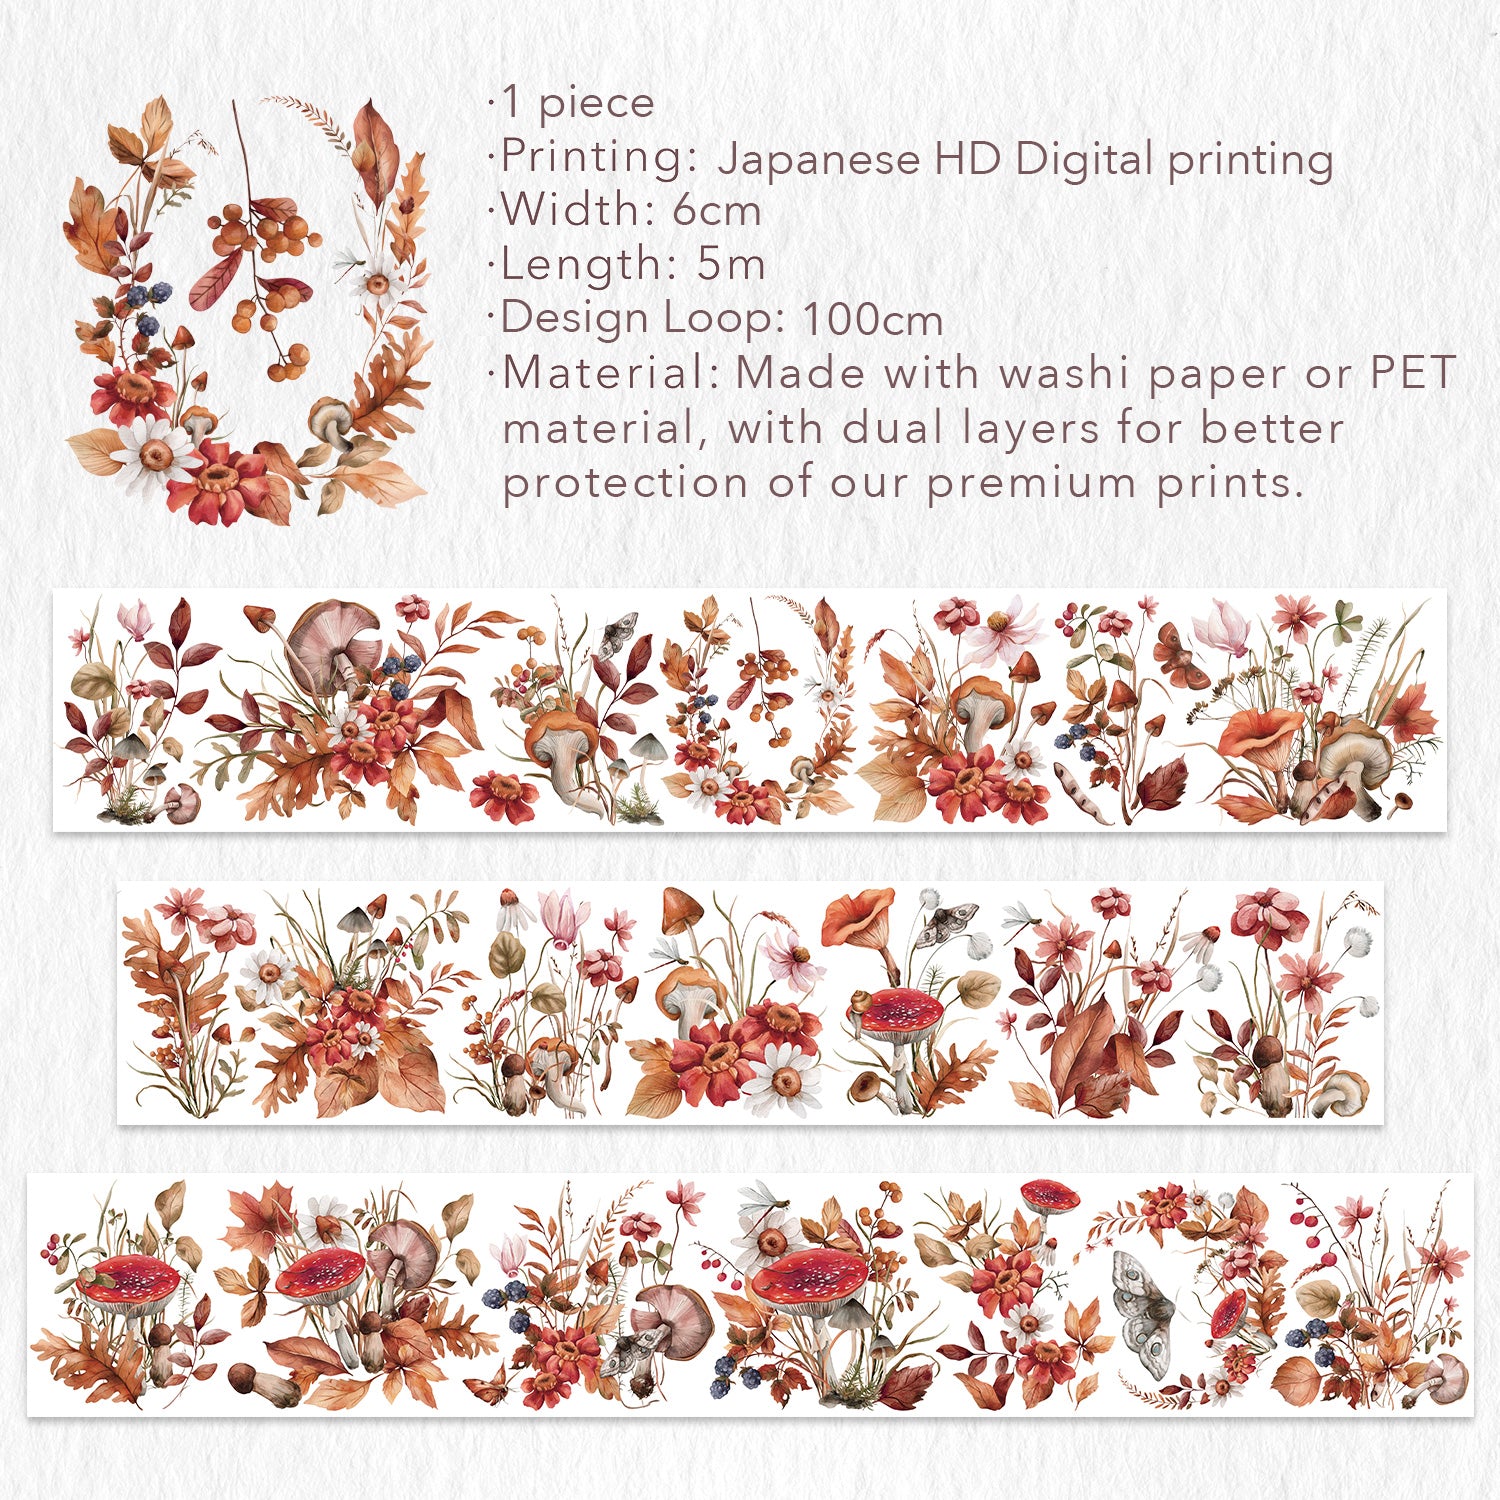 Craft Perfect - Washi Tape - Spring Meadow - (15mm/5m) - 3 Rolls - 9324E